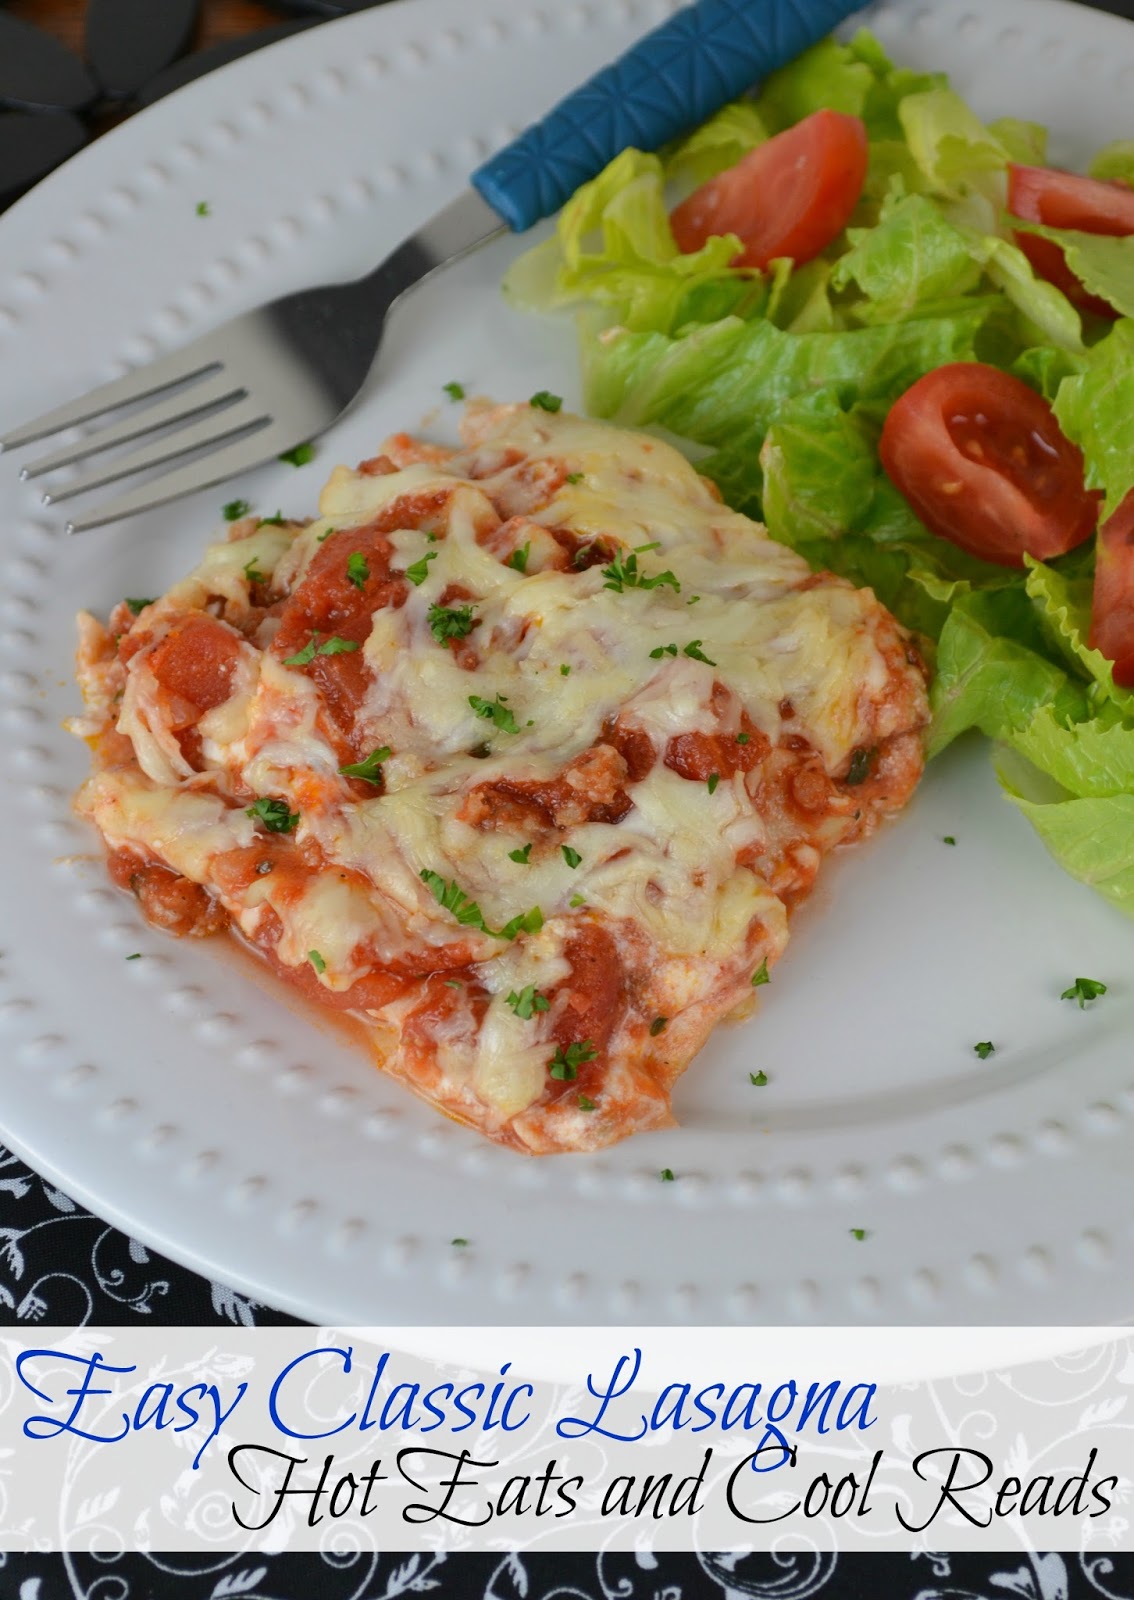 Classic comfort food with an easy to make homemade sauce! This recipe is sure to please the whole family! Easy Classic Lasagna from Hot Eats and Cool Reads